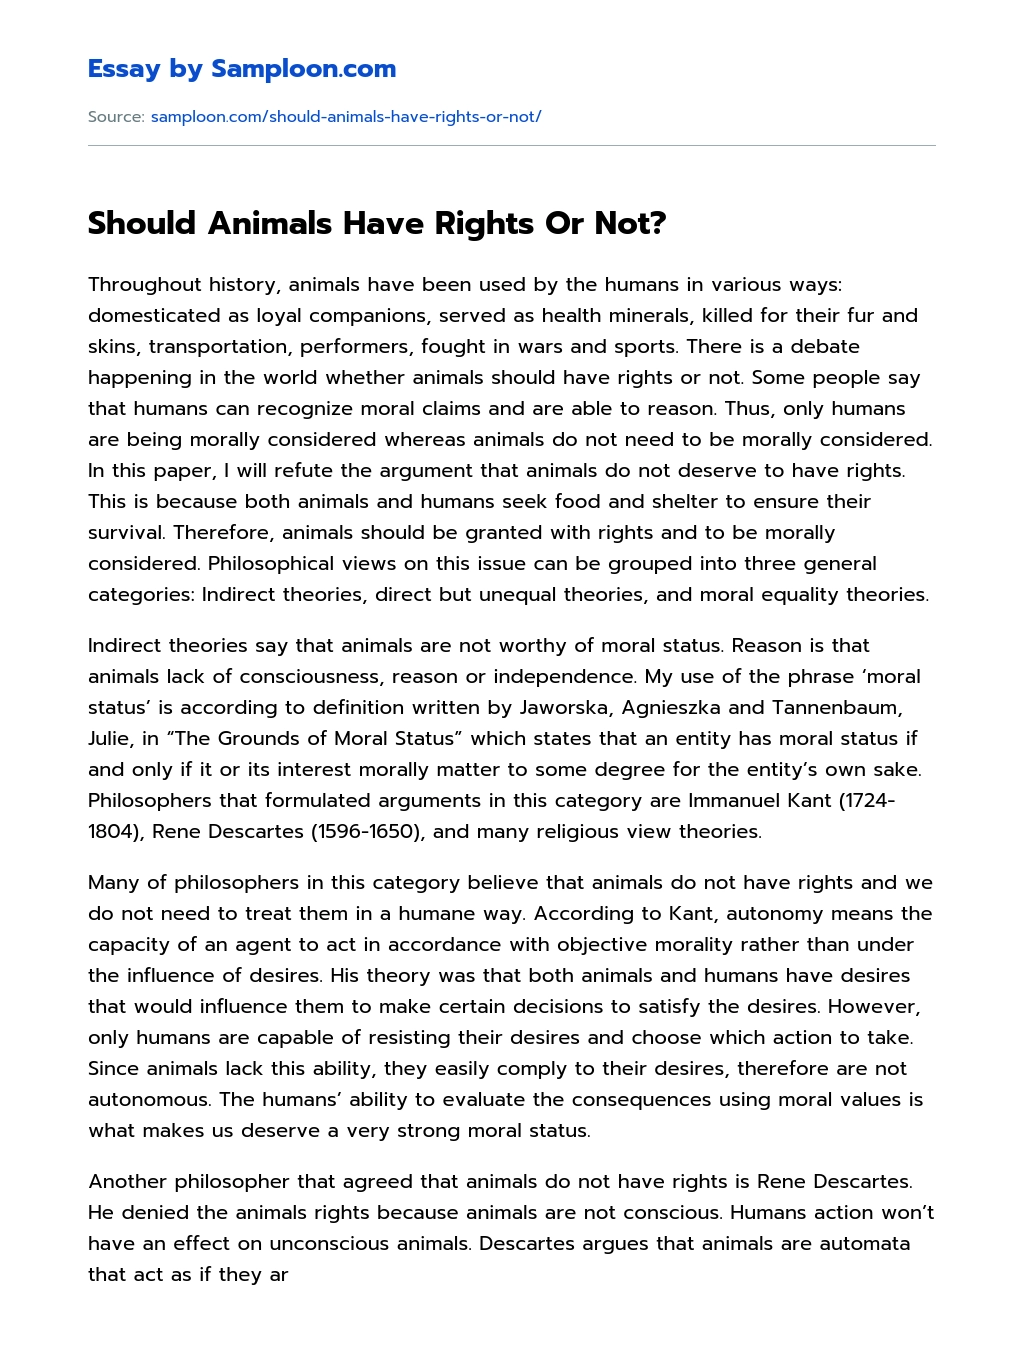 Should Animals Have Rights Or Not? Free Essay Sample on 